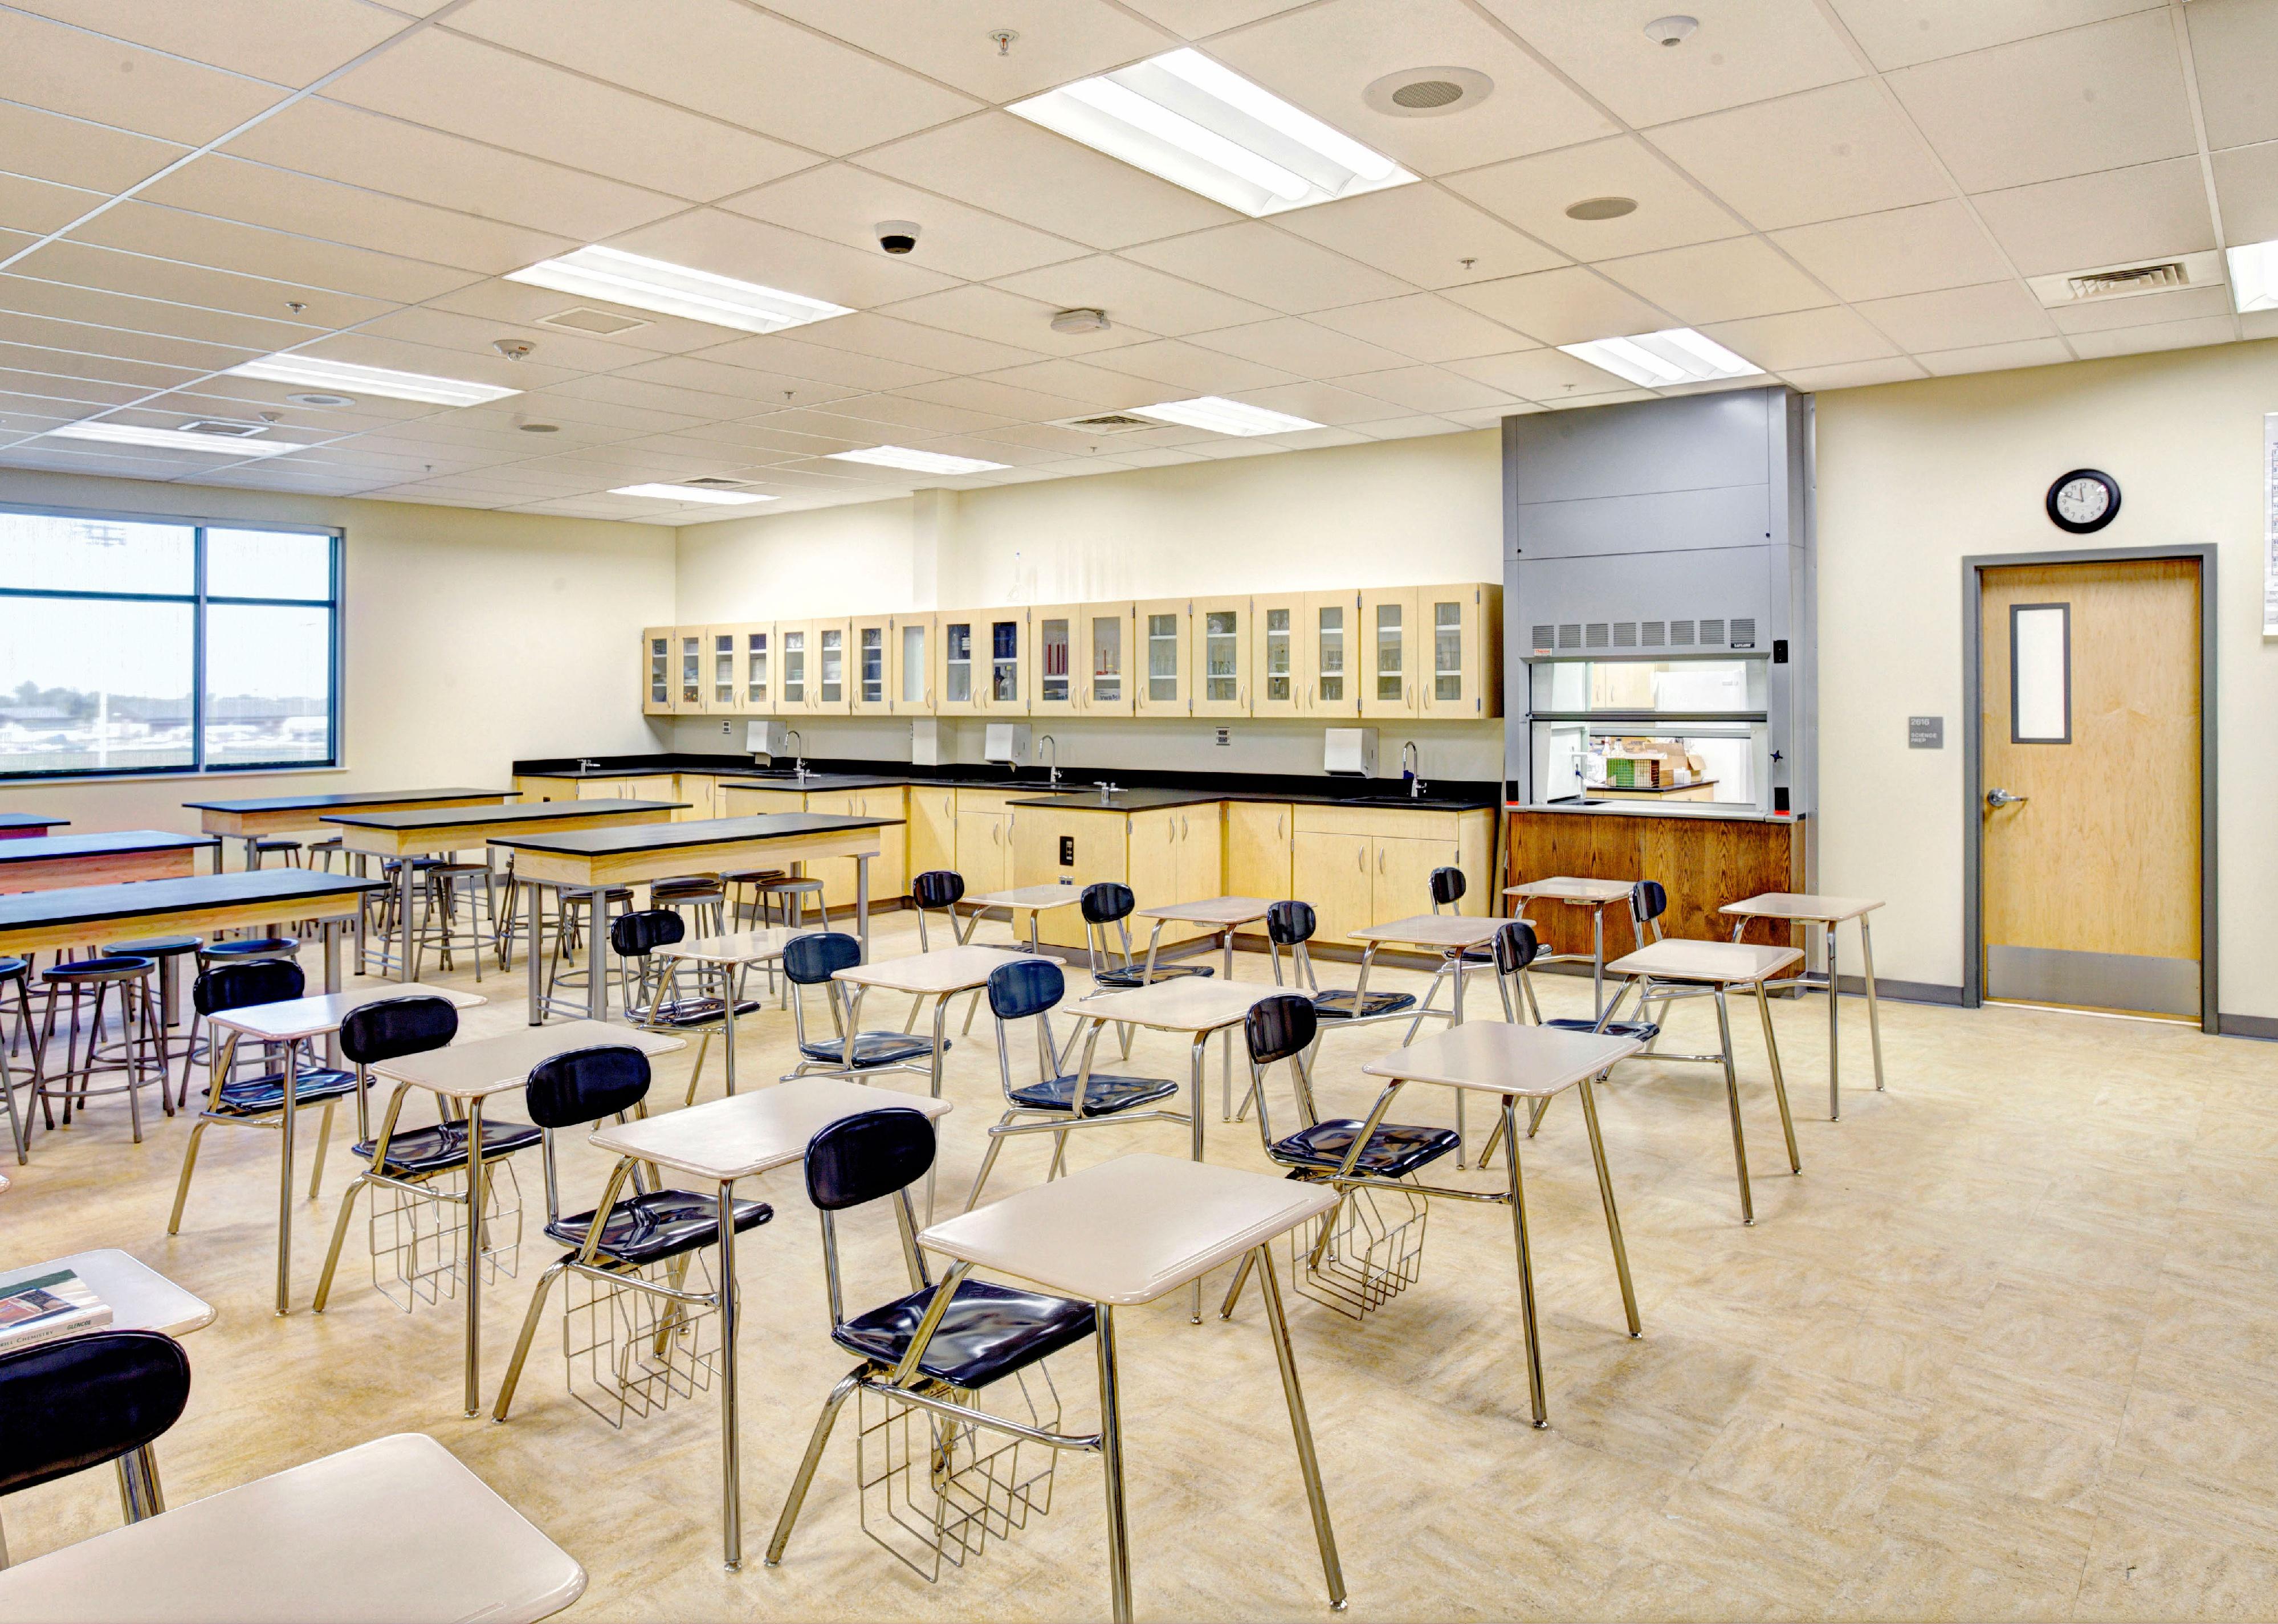 Science classroom with desks, tables, lab area, and biology models